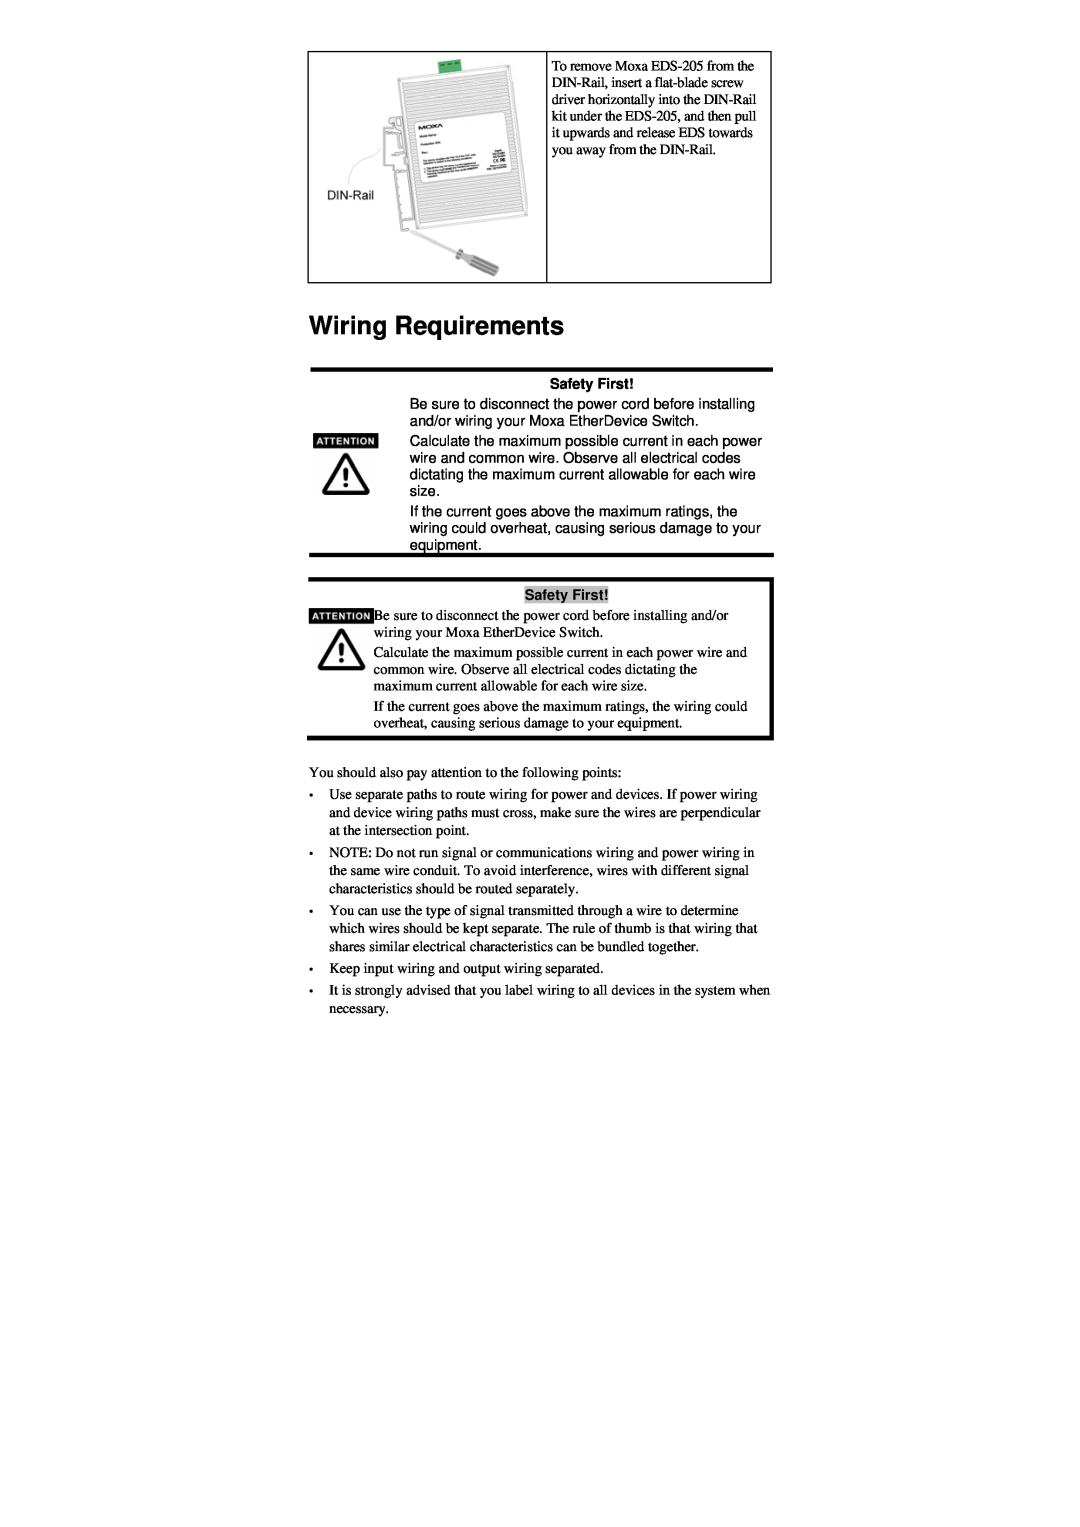 Moxa Technologies EDS-205 manual Wiring Requirements, Safety First 